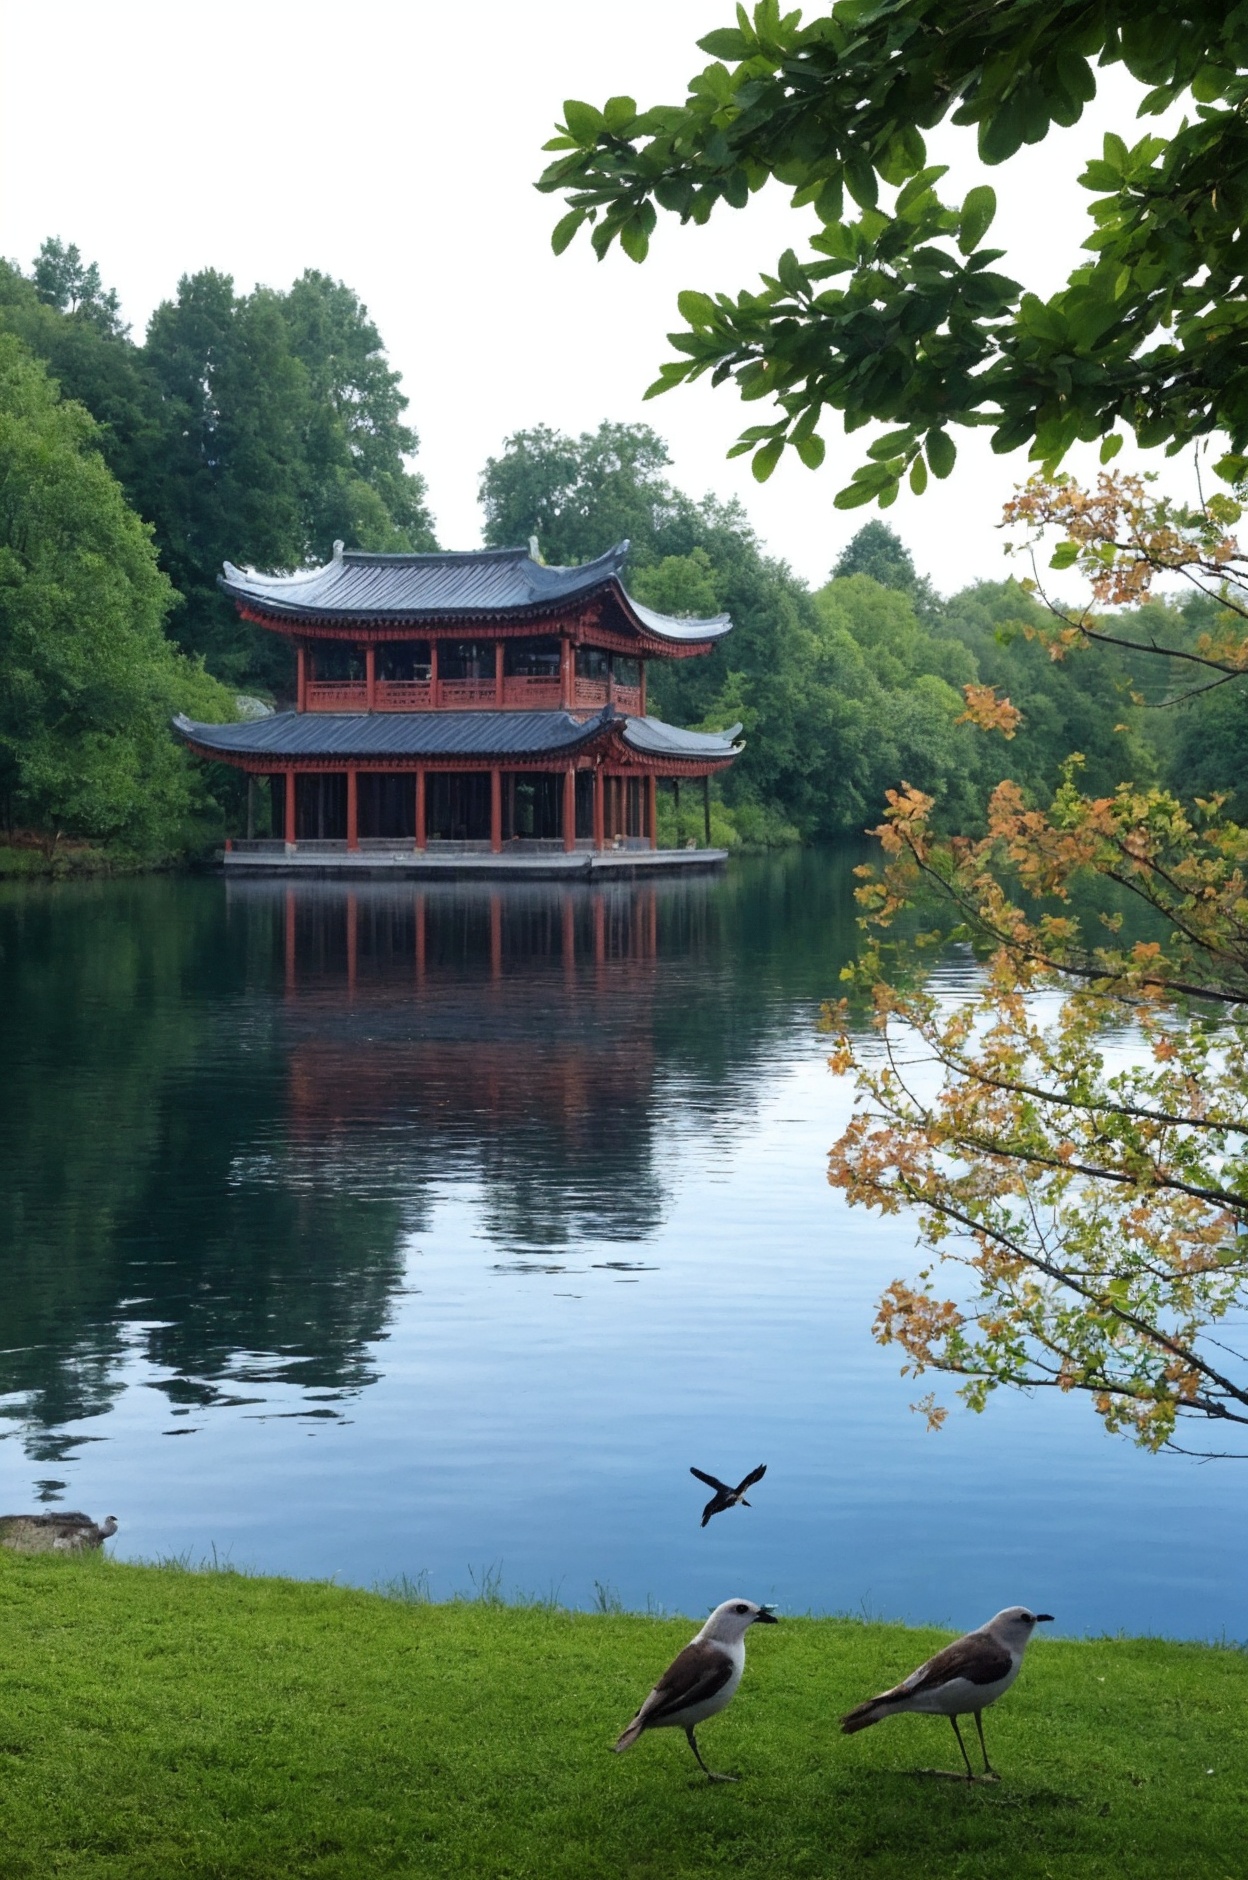 This is a painting depicting ancient Chinese architecture and natural landscape. In the picture, we can see a traditional blue-roofed building, which is located next to a peaceful lake. There is an old pine tree in front of the building, with luxuriant branches and leaves and a beautiful tree shape. There are some boats on the lake and birds flying in the distance. The whole scene gives a sense of tranquility and harmony.